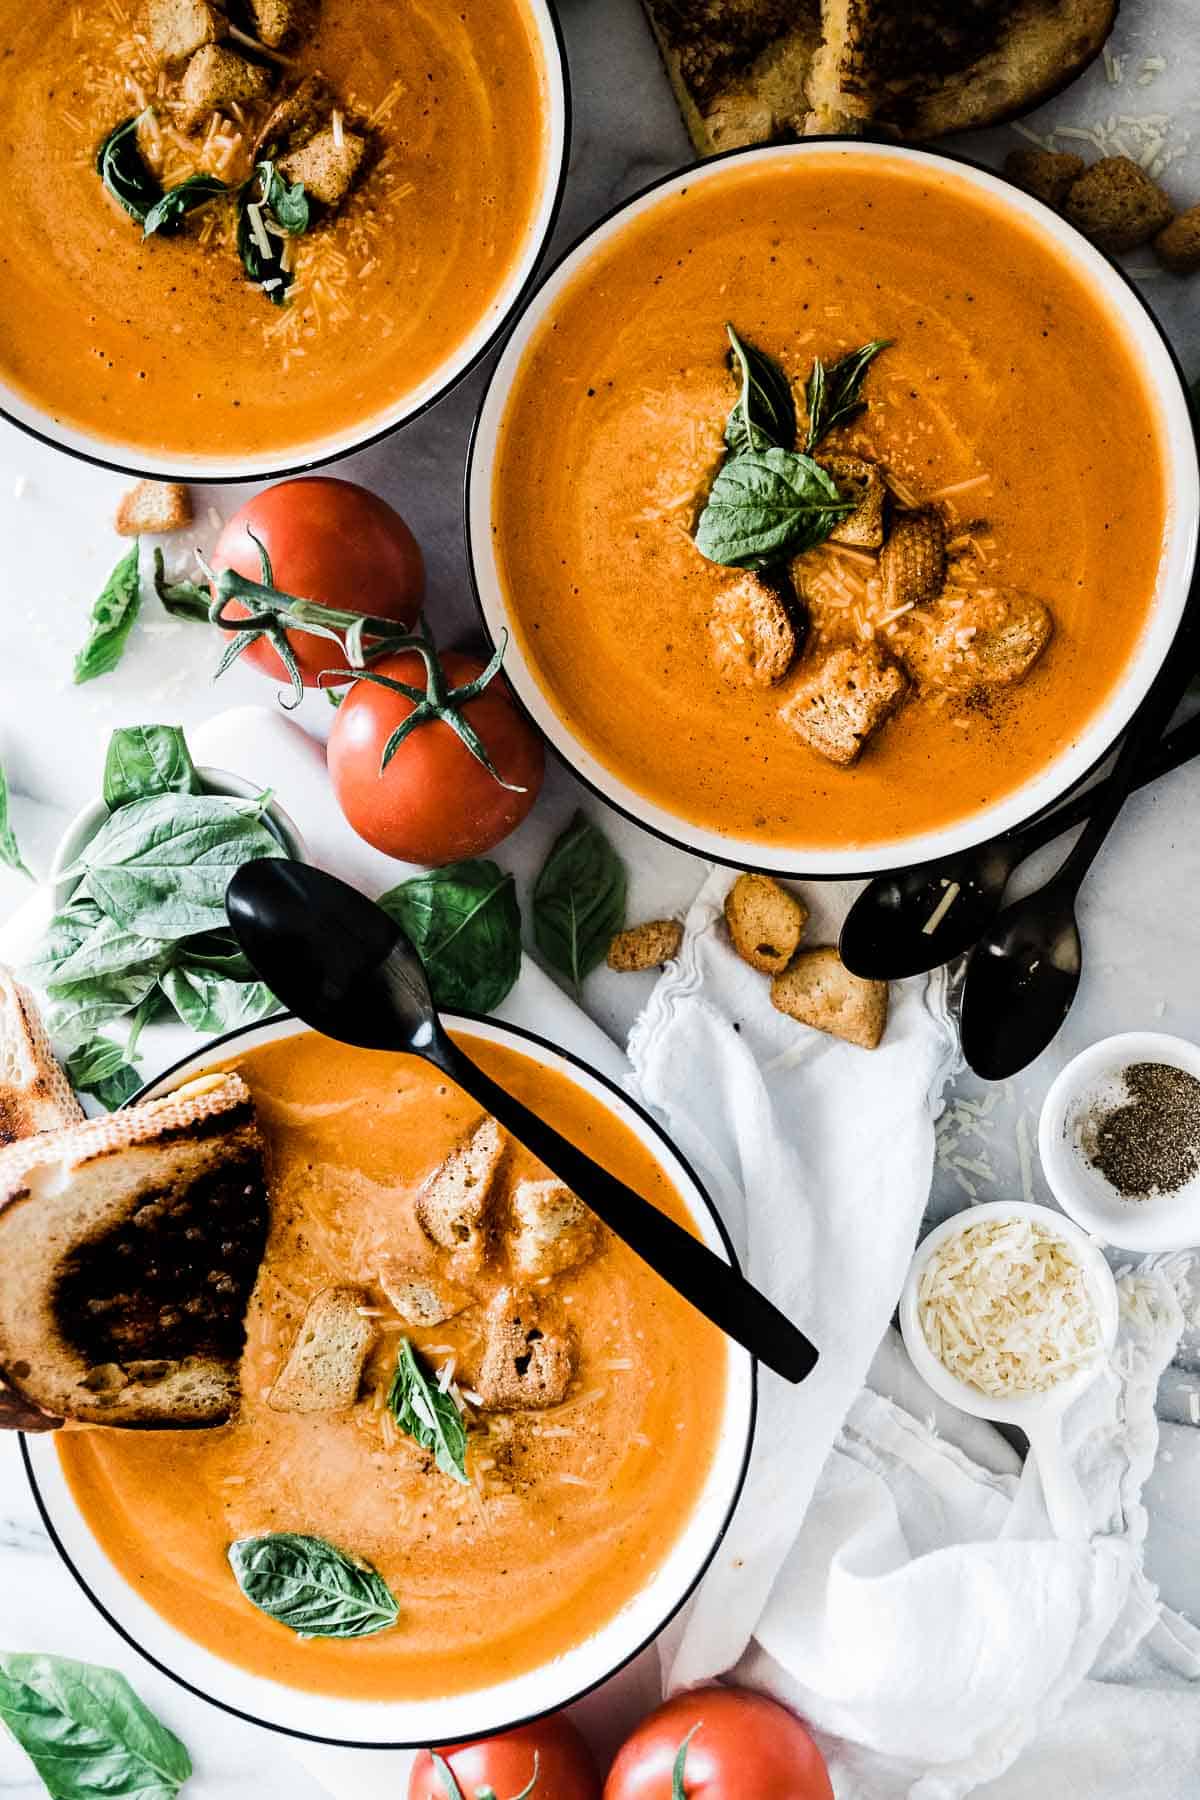 Instant pot tomato soup in white bowls with black rims. They are garnished with croutons and basil.